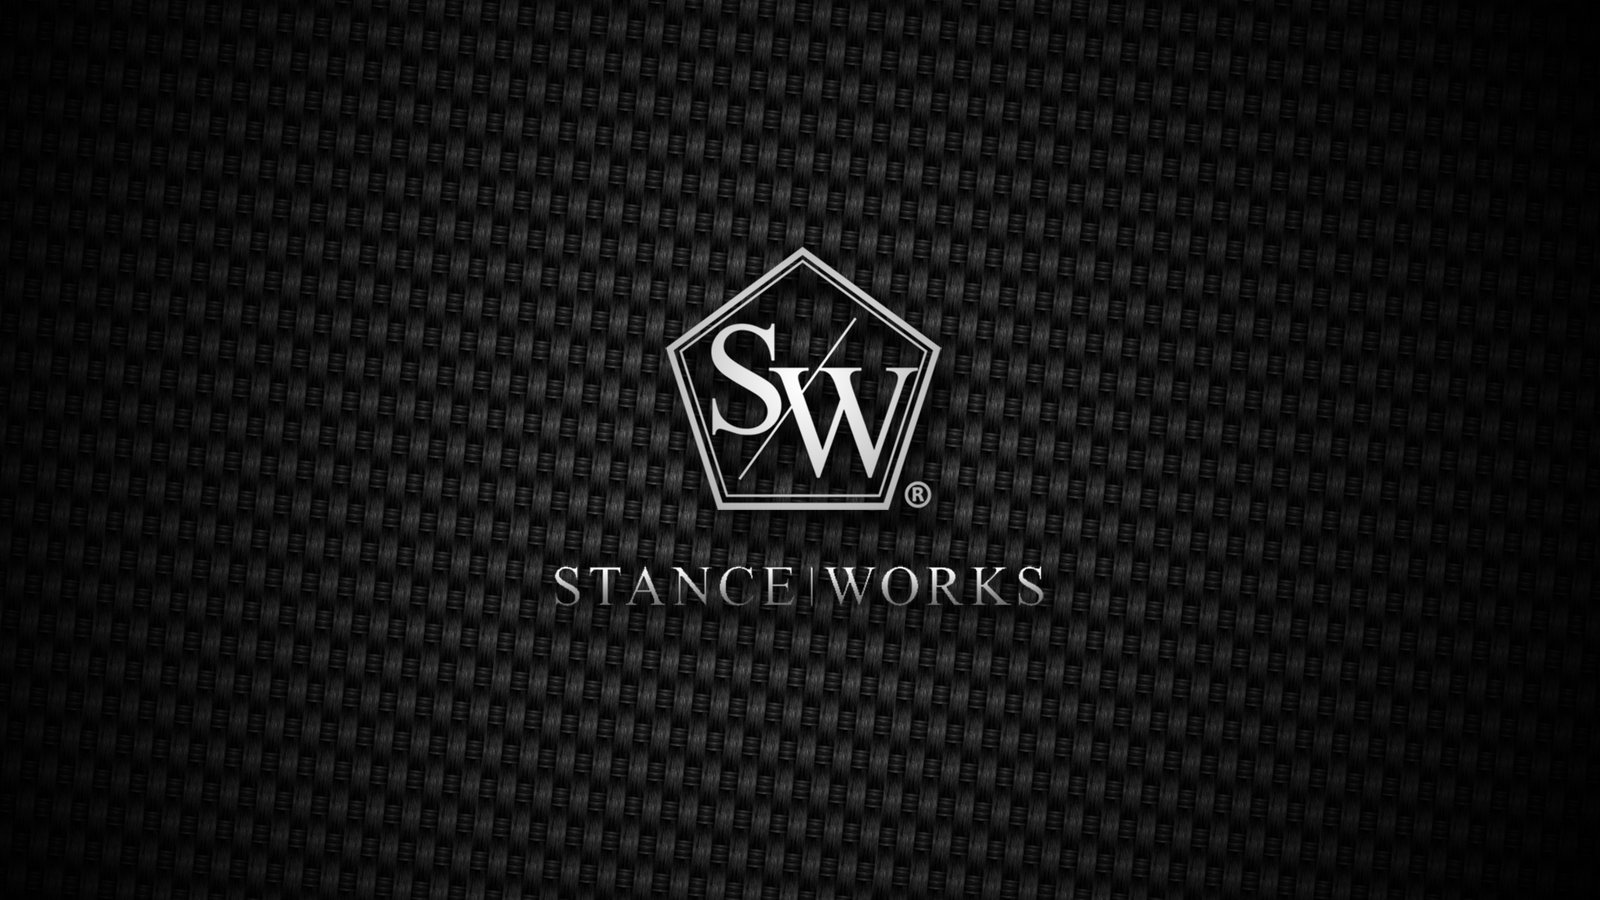 Stance Works Wallpaper By Norgesherligste